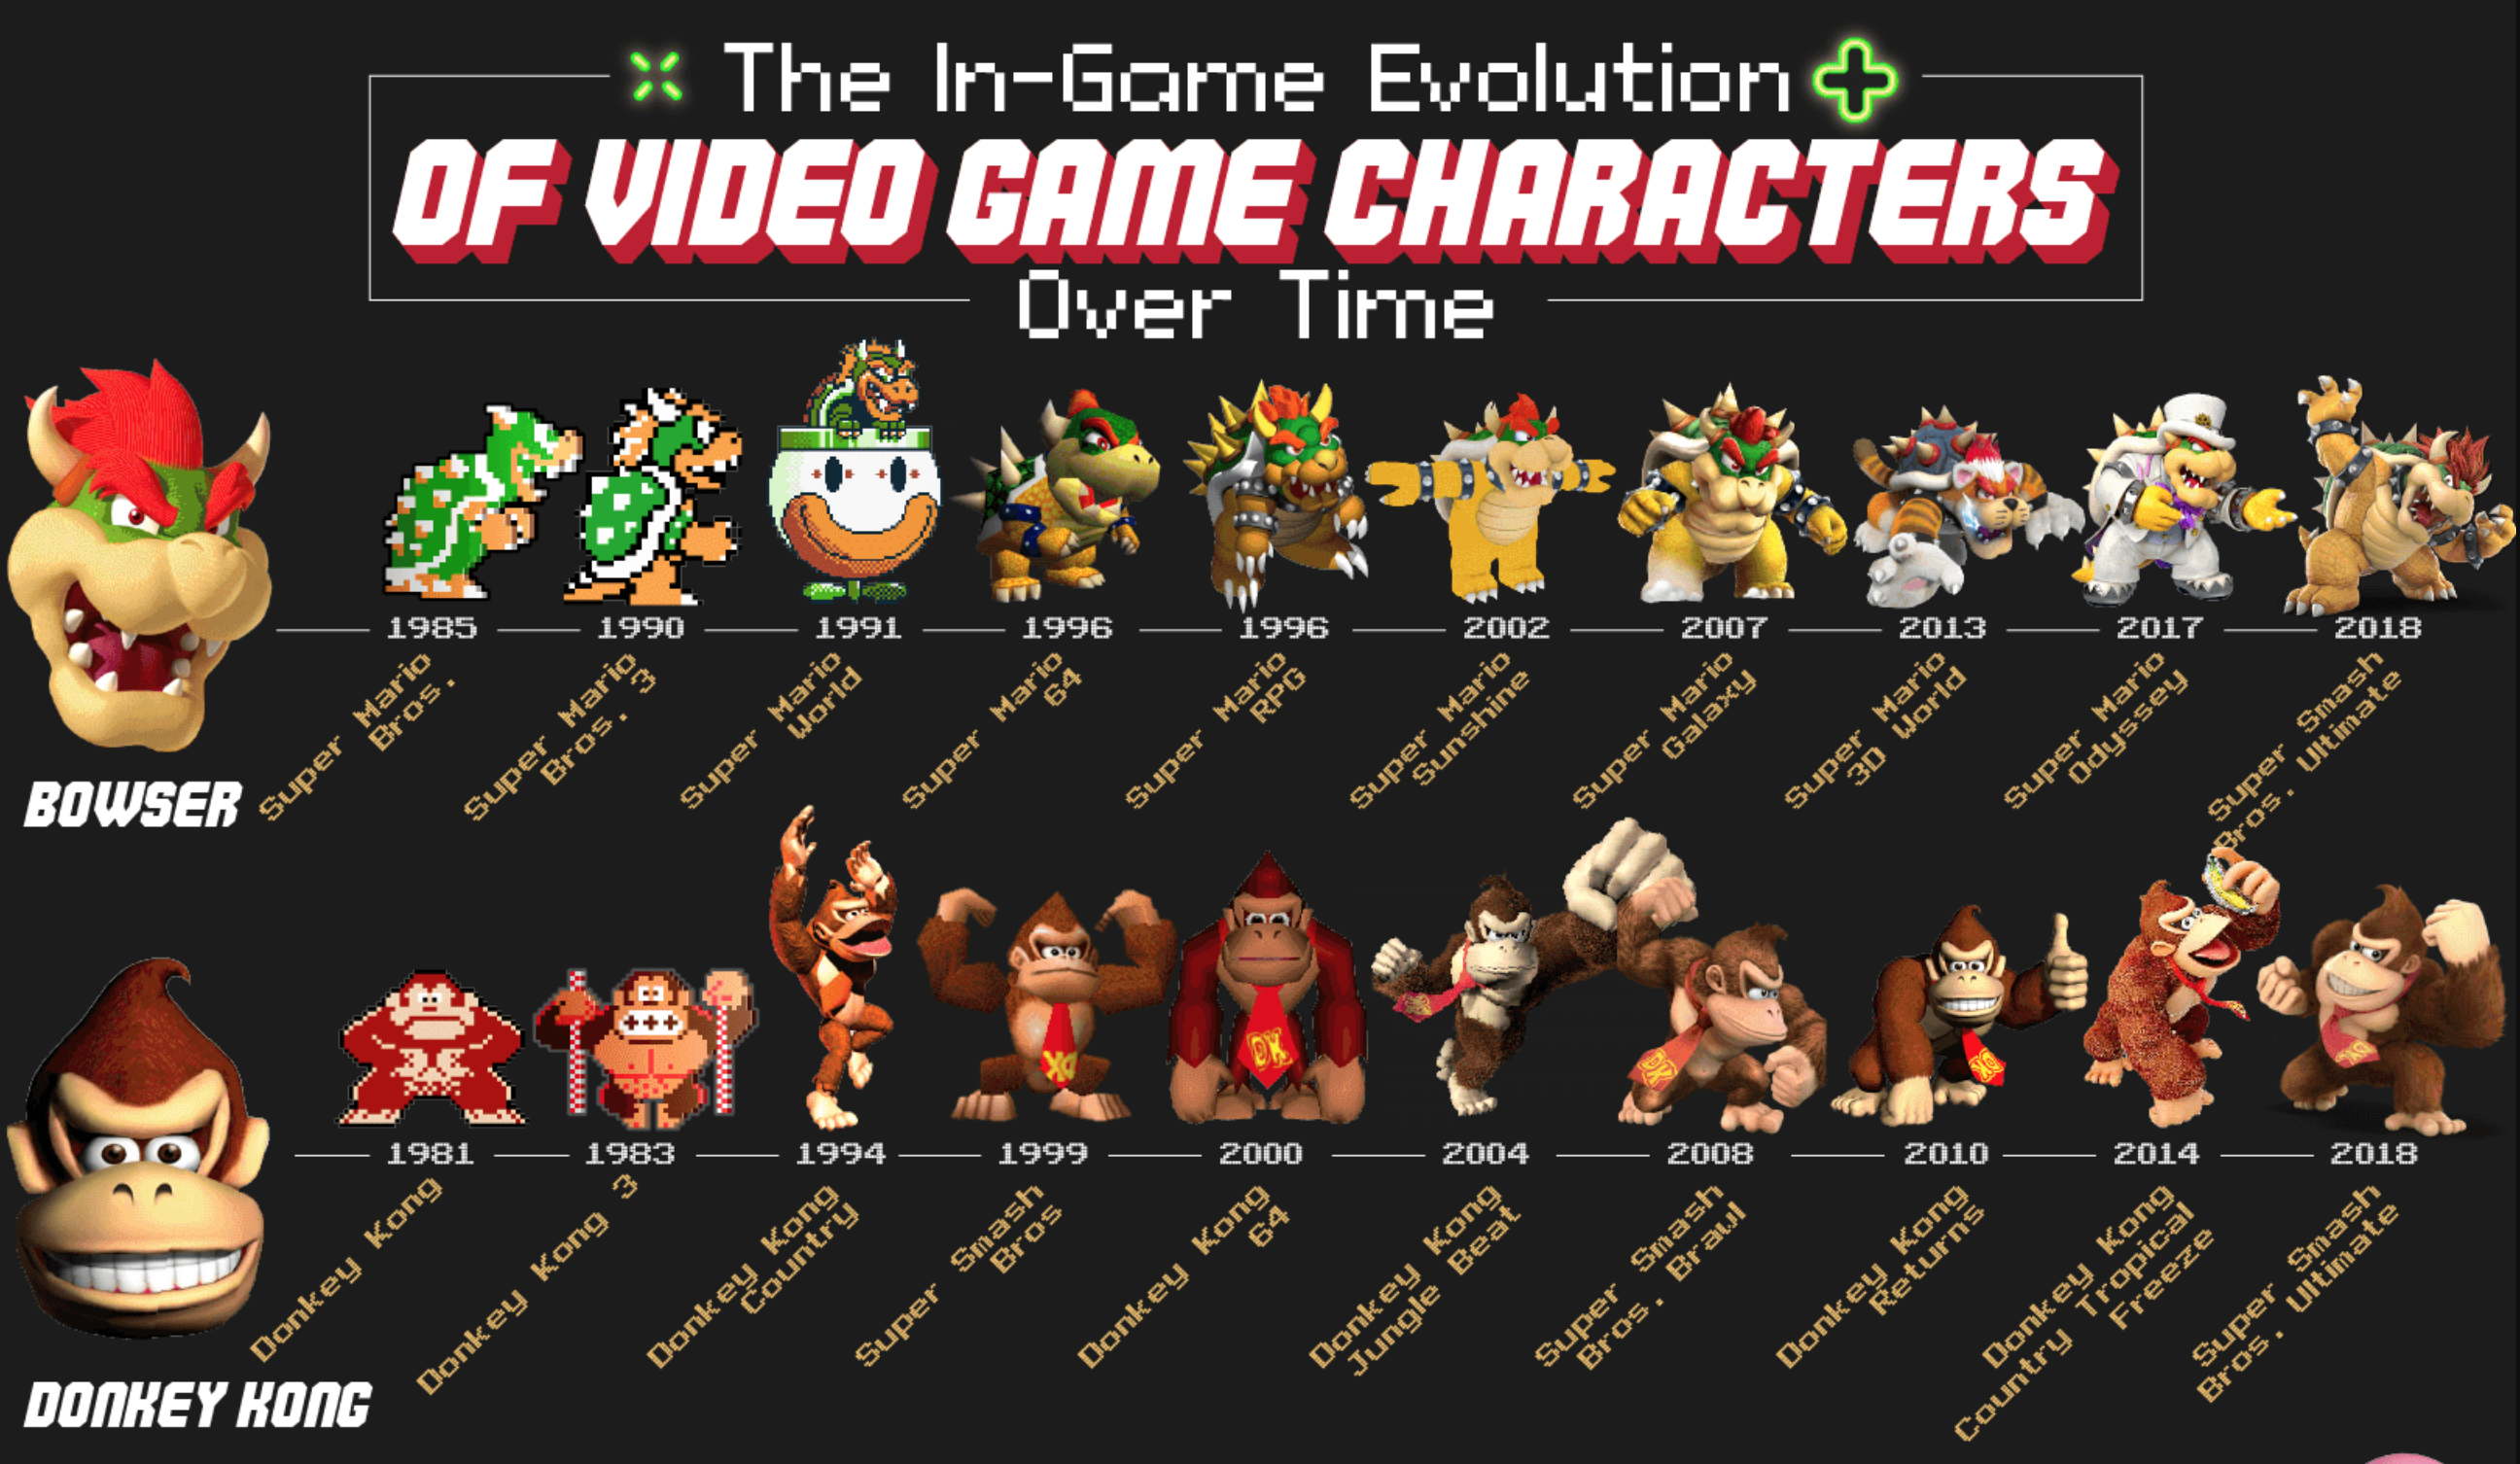 the in-game evolution of video game characters over time - through the years -  bowser and Donkey Kong